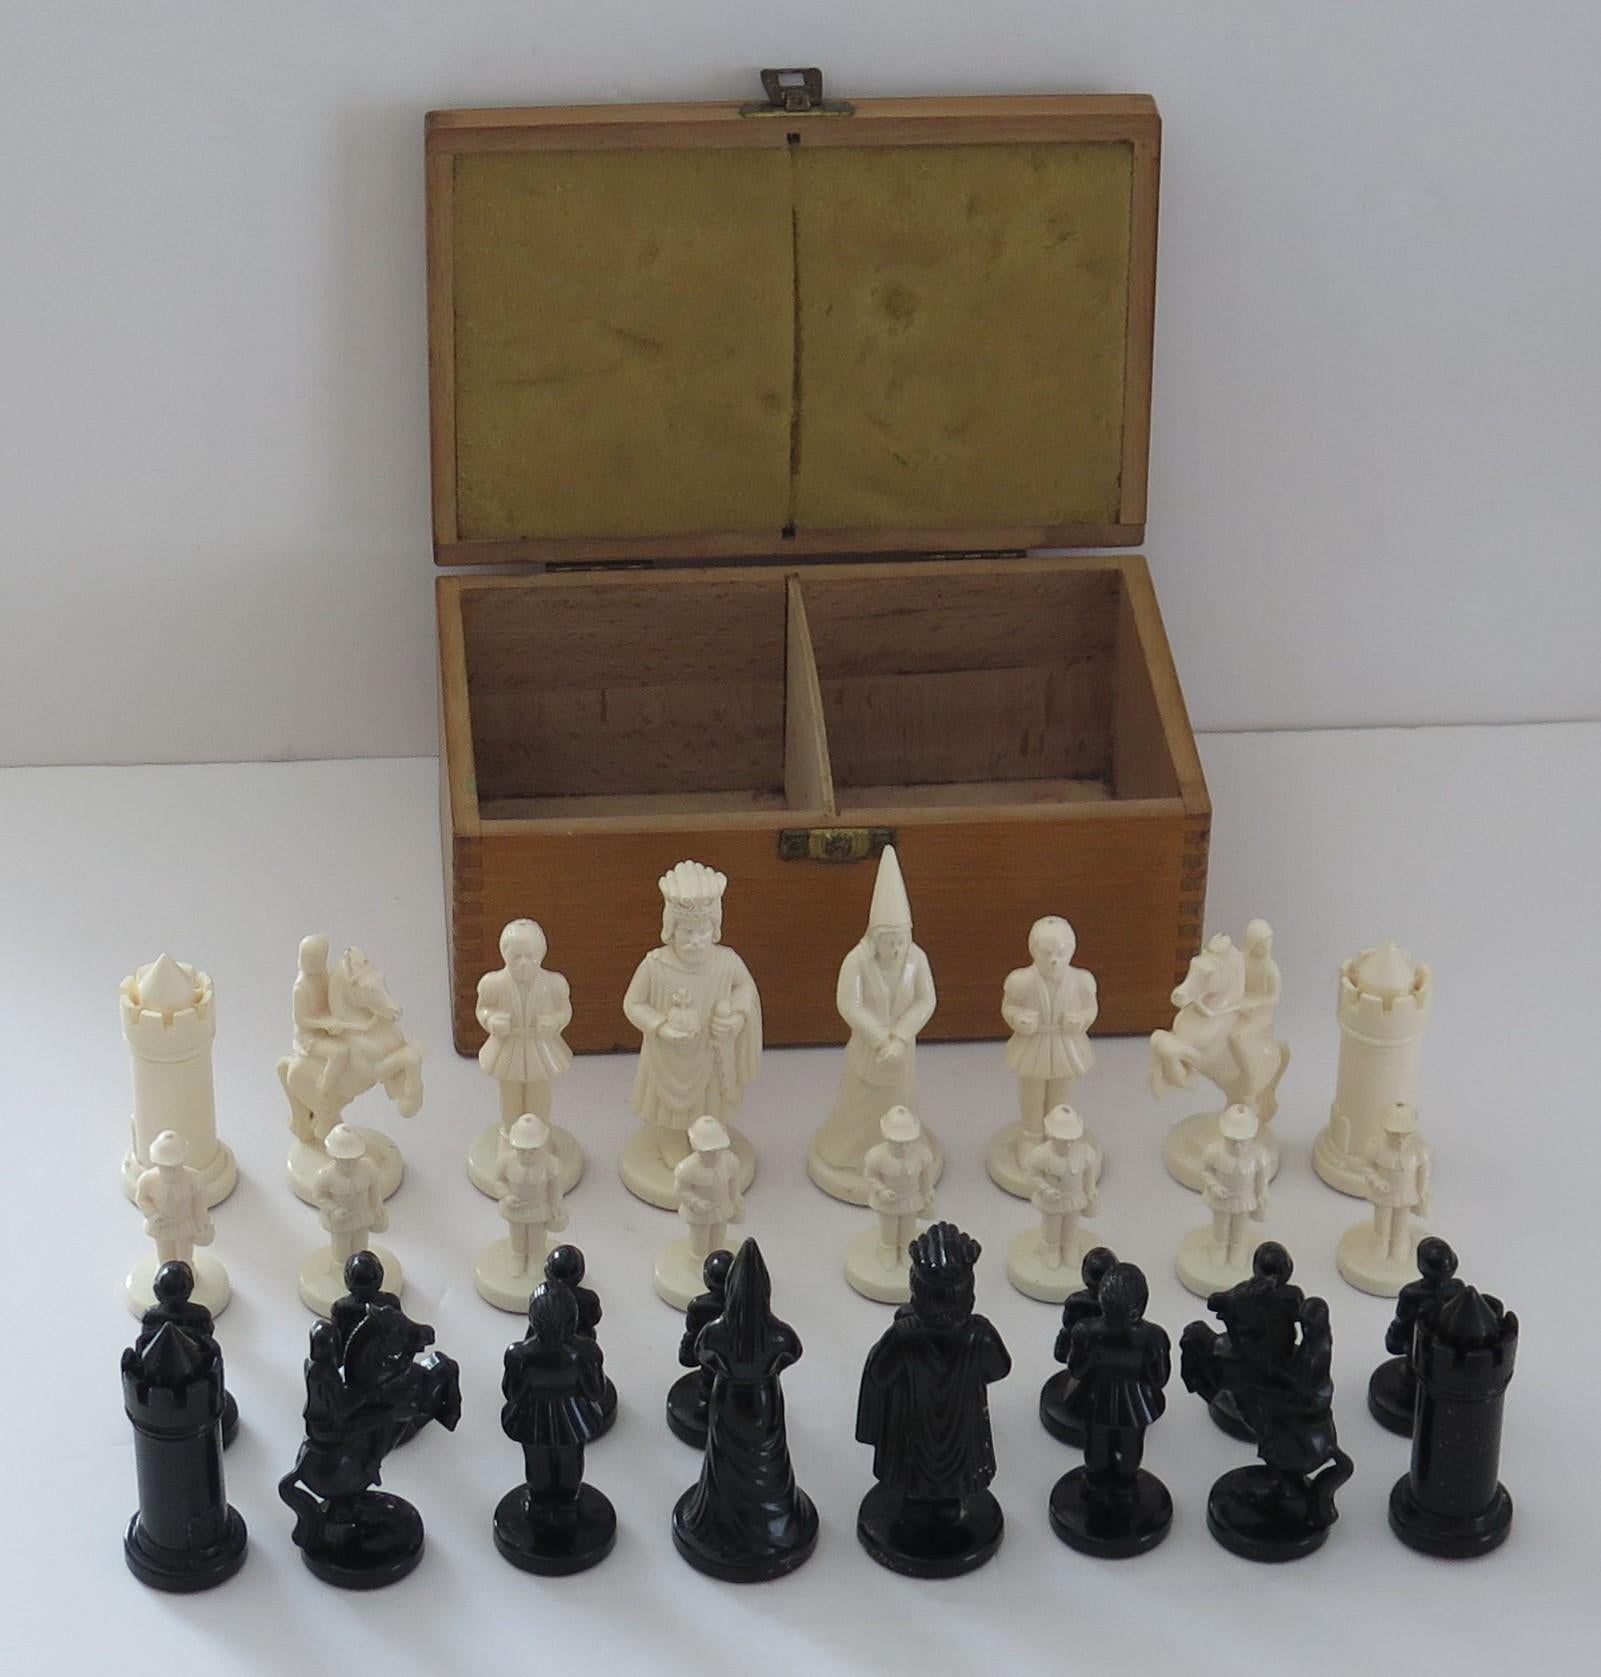 resin chess sets